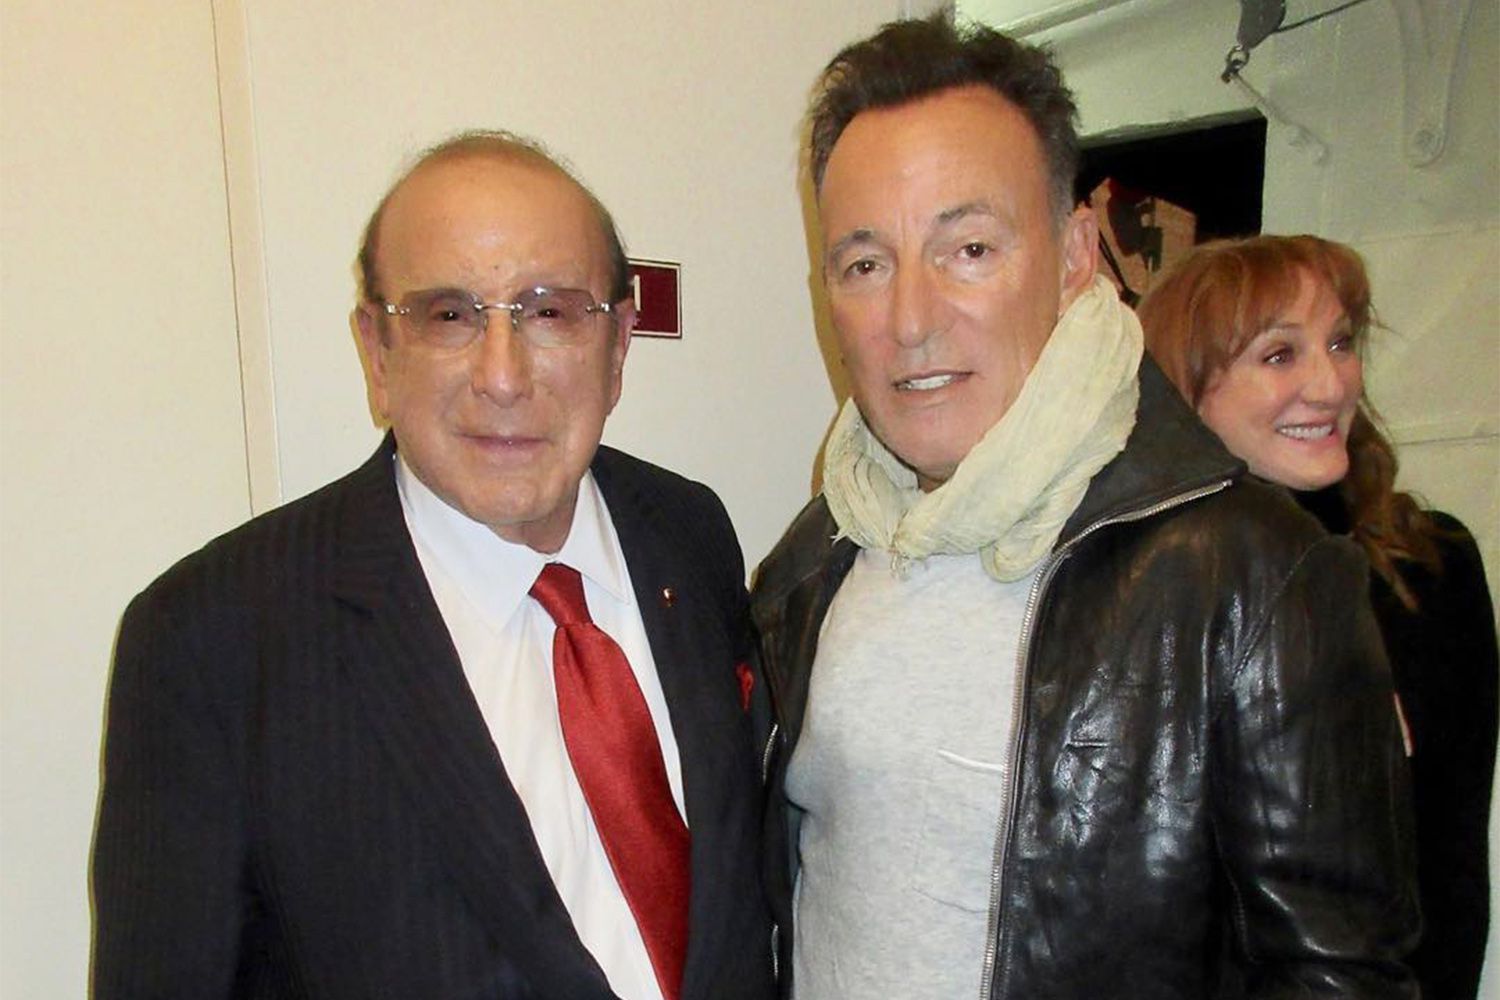 Clive Davis posted this photo to his Instagram account on November 12, 2017 with the caption: "I saw Bruce @springsteen’s triumph on Broadway recently and had a chance to reminisce with my old friend on the early days of our careers and time working together. Bruce couldn’t believe the filmmakers of my film found some of the early footage that they did. You can watch #thesoundtrackofourlives on @iTunes now."